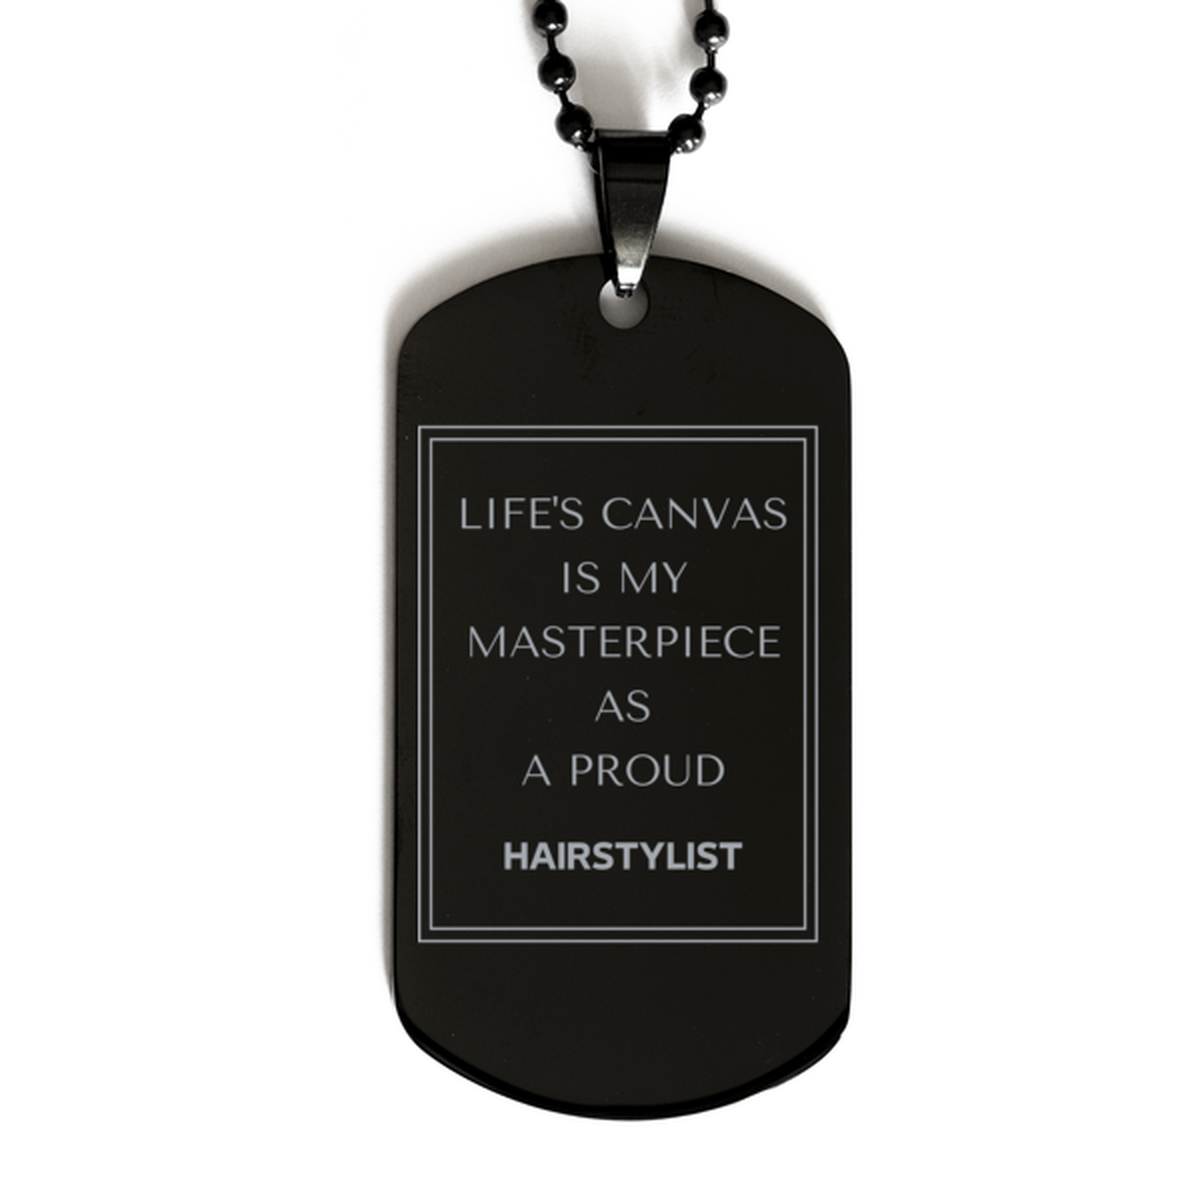 Proud Hairstylist Gifts, Life's canvas is my masterpiece, Epic Birthday Christmas Unique Black Dog Tag For Hairstylist, Coworkers, Men, Women, Friends